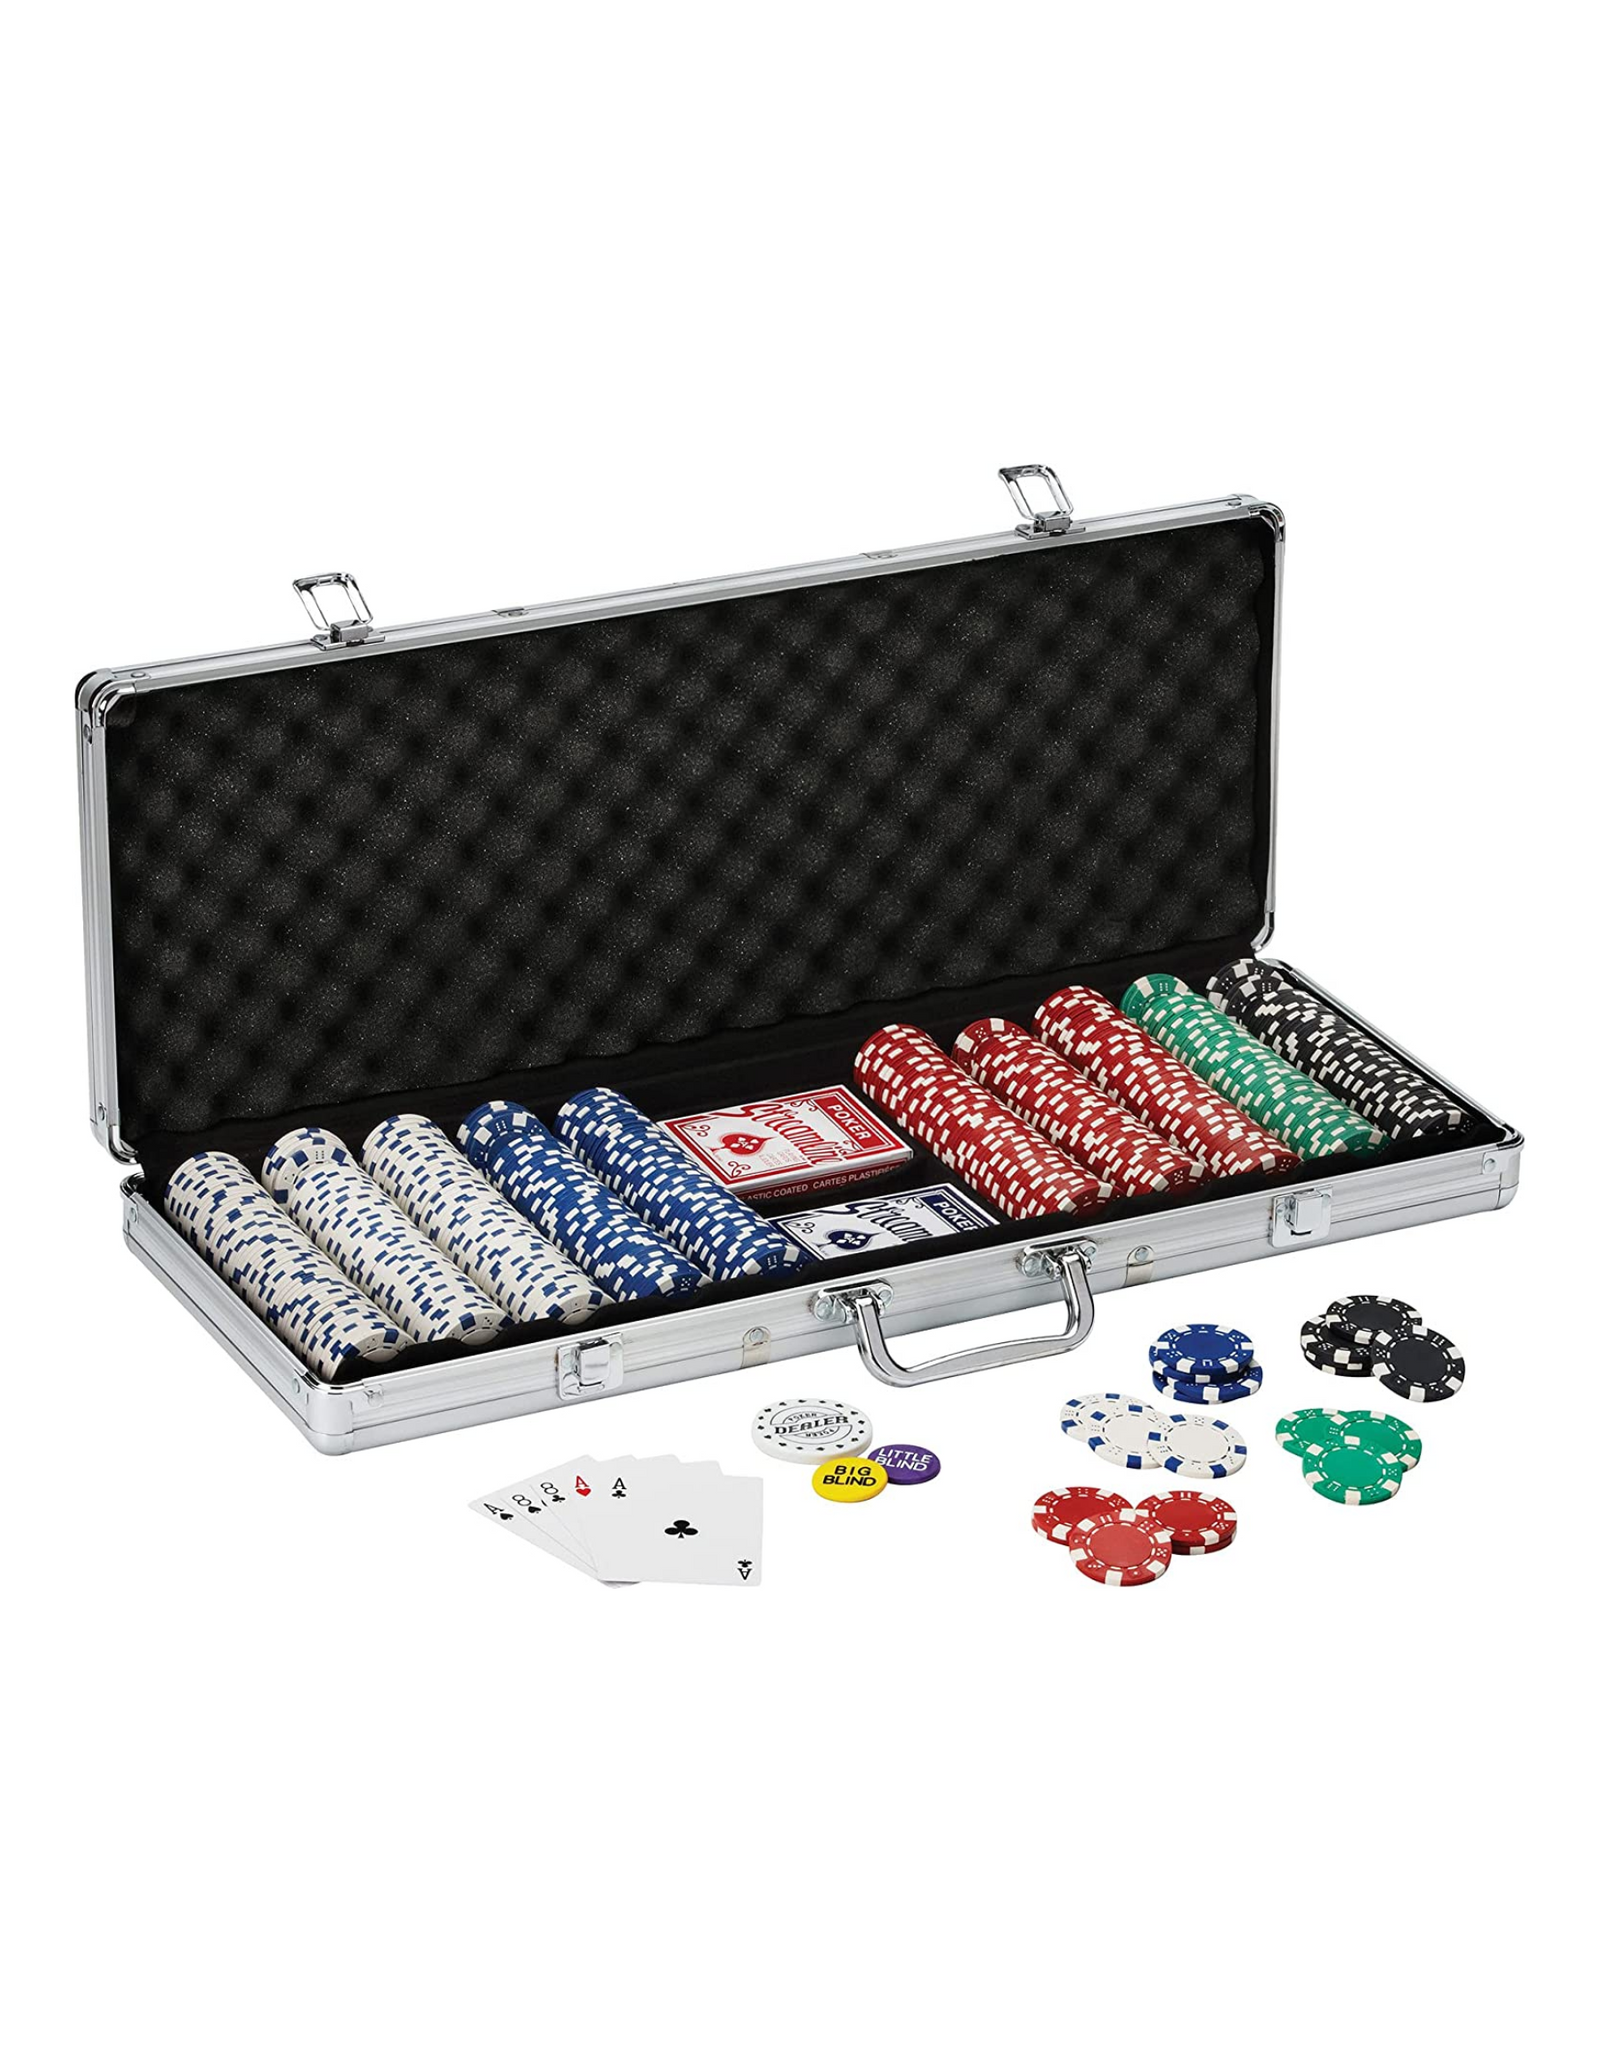 Fat Cat 11.5 Gram Texas Hold 'em Claytec Poker Chip Set with Aluminum Case, 500 Striped Dice Chips